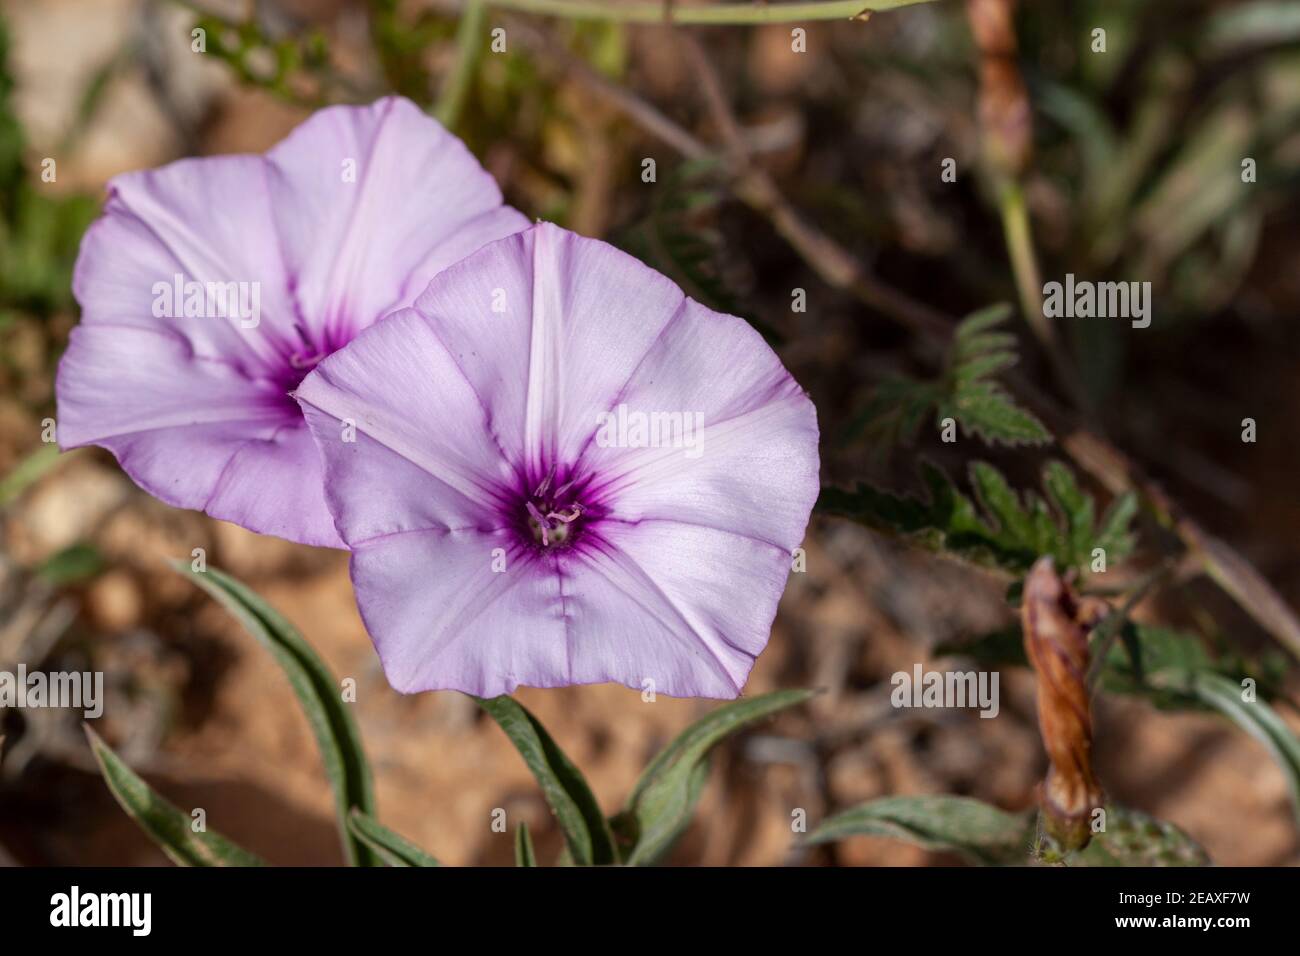 Close up image of a pair of Lavender Moonflowers (Ipomoea turbinata) A delicate light purple, pink colored flower has a flat pentagonal shape Stock Photo